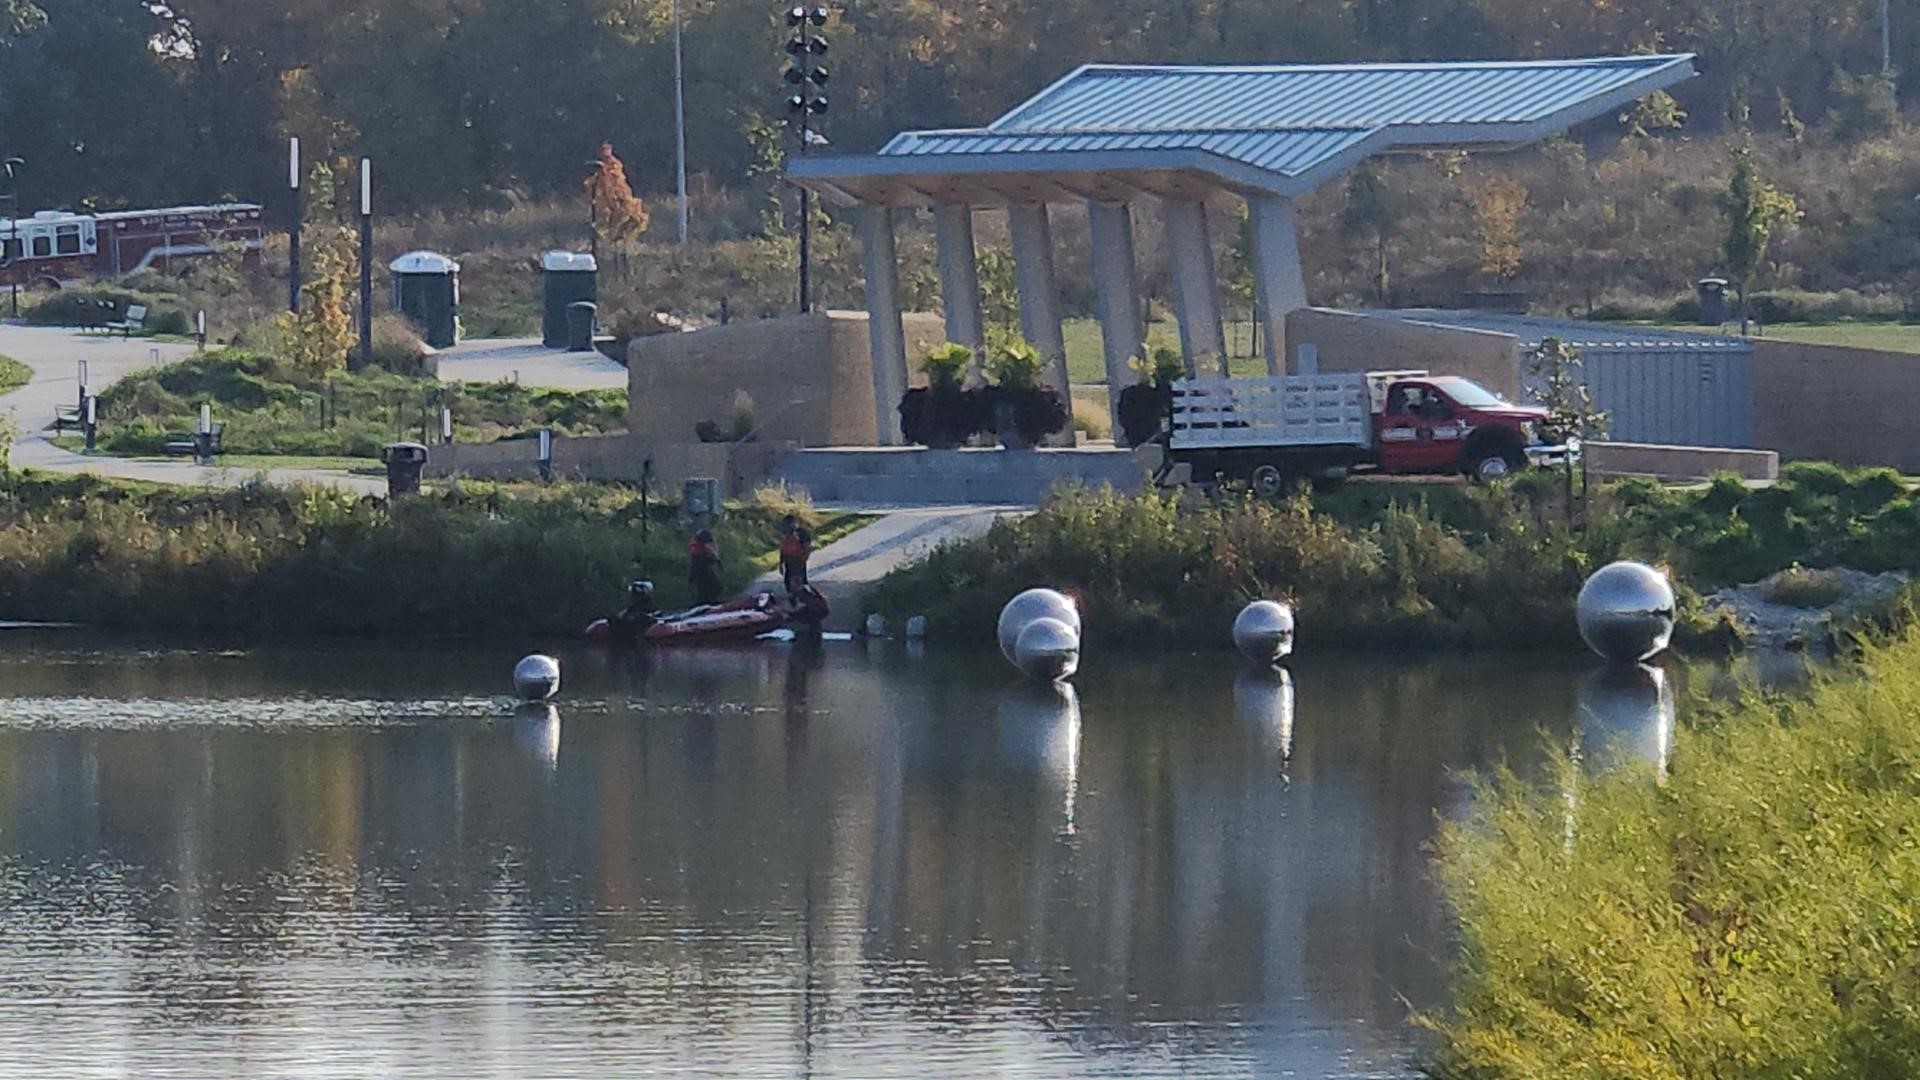 Police called the report of a deceased person being dumped in a pond behind the West Des Moines Public Library "fictitious."